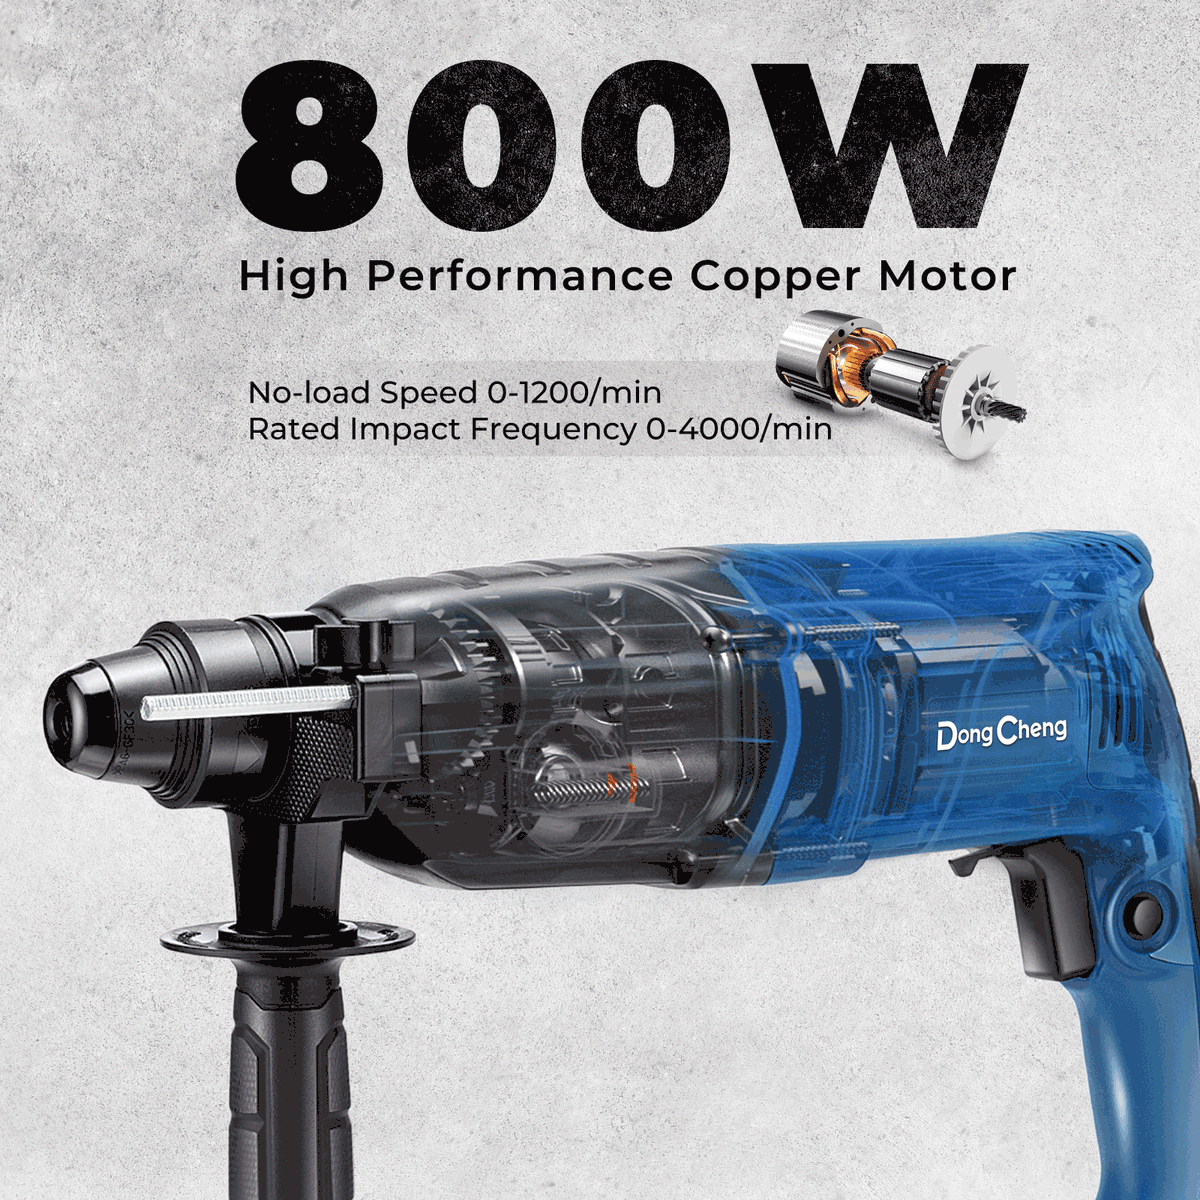 Supercharge your construction projects with the rotary hammer #DZC05-26B! 💥🔨
Equipped with an 800W copper motor, this powerful tool ensures high-quality, stable performance and precision. Enhance your toolkit and achieve more in less time!

#DongChengTools #RotaryHammer